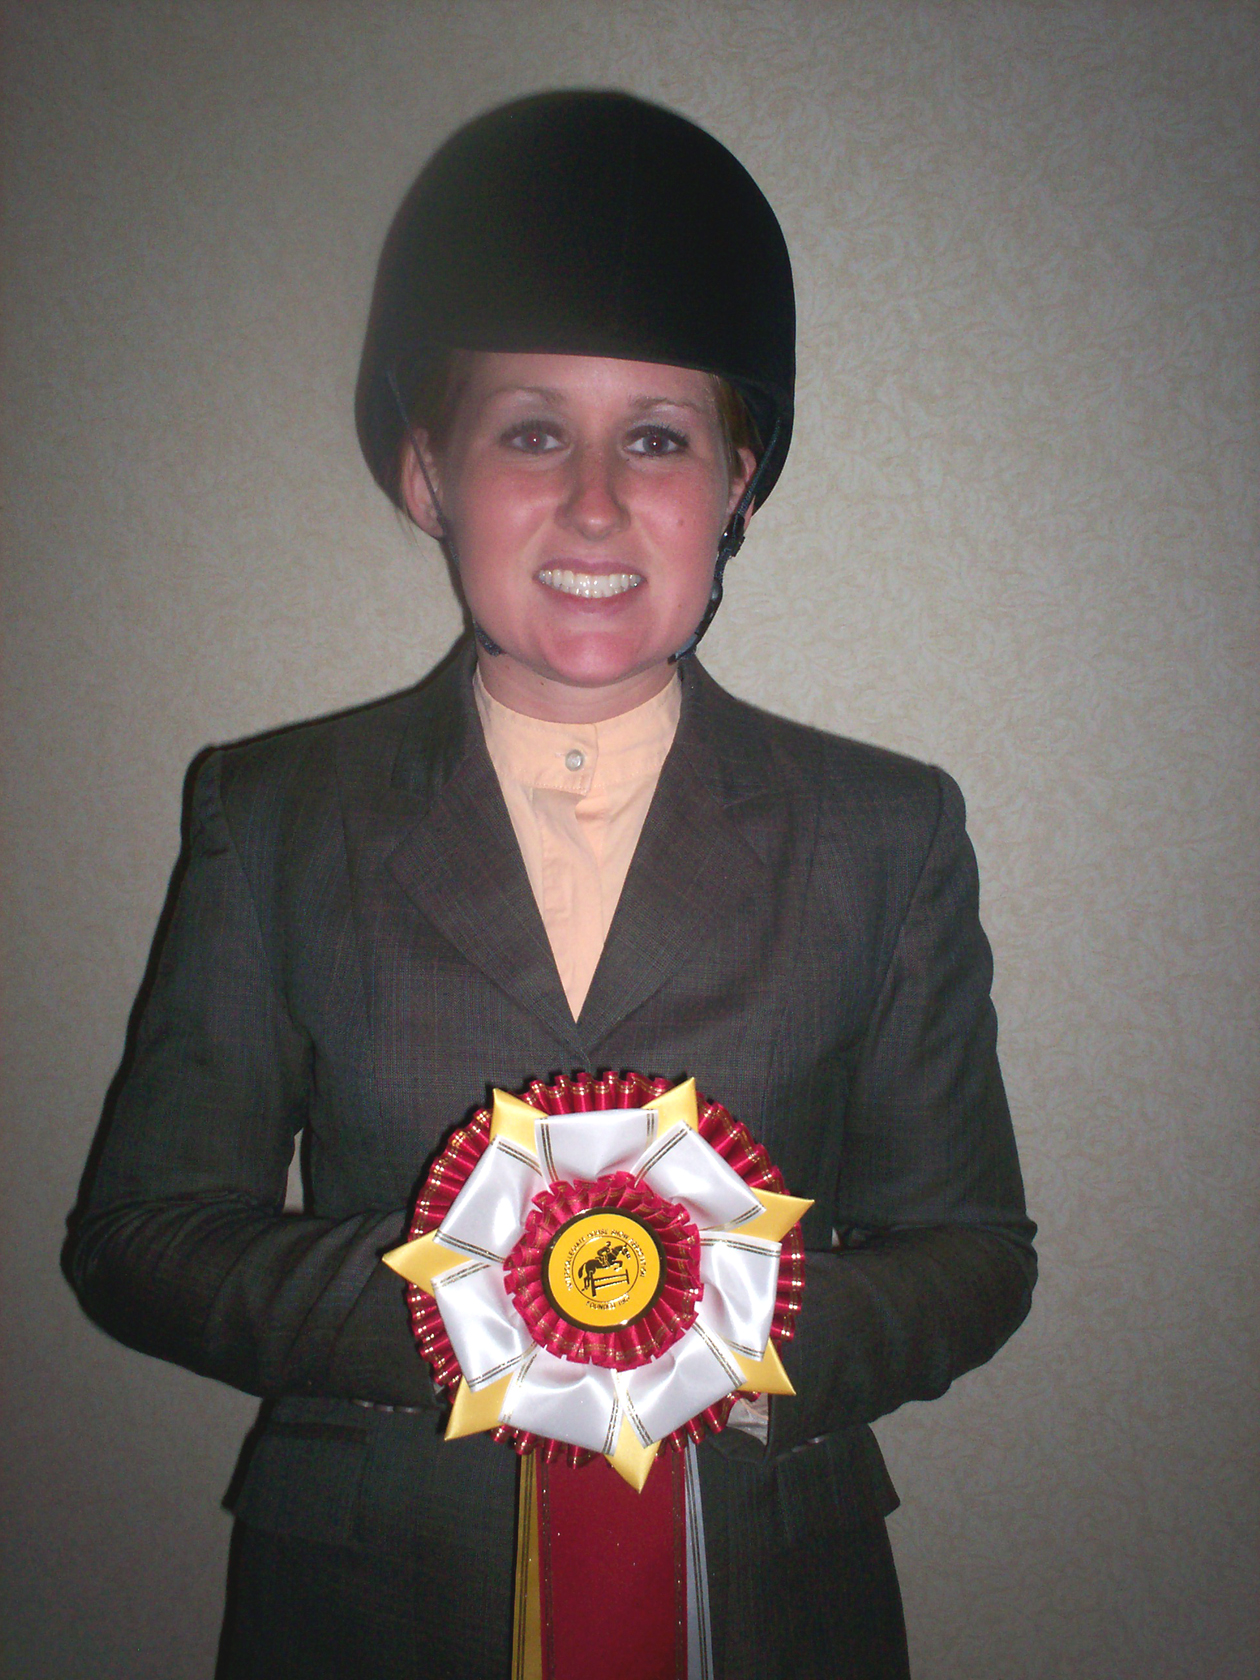 NDSU Intercollegiate Horse Show Association team member Katie Beaudine shows off the ribbon she received in a hunt seat competition.